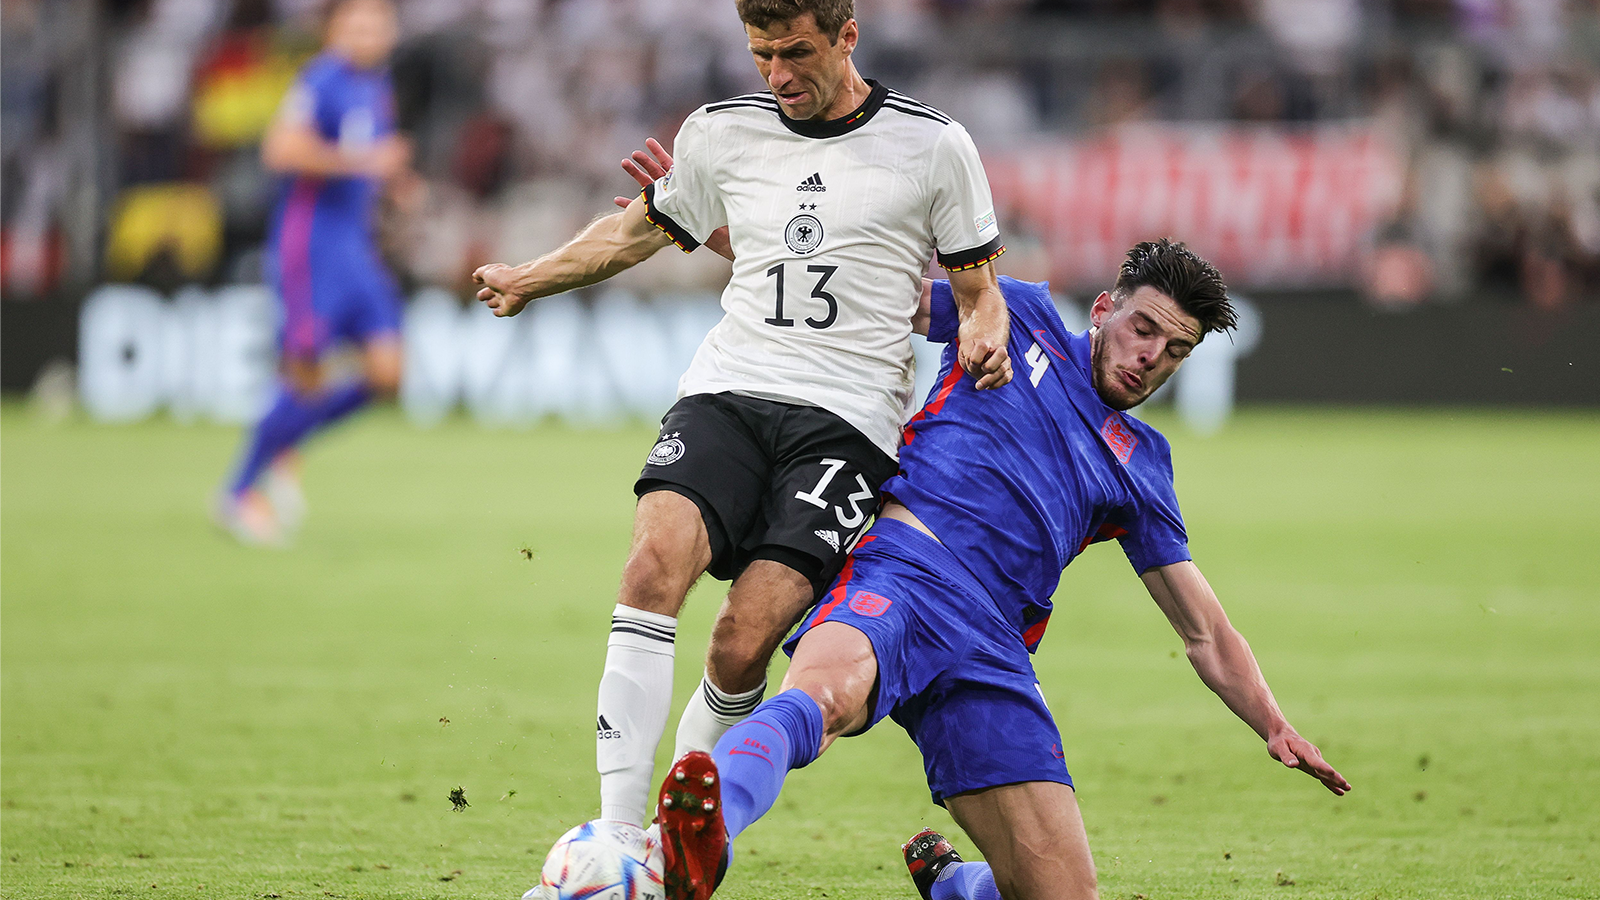 Declan Rice makes a tackle against Germany